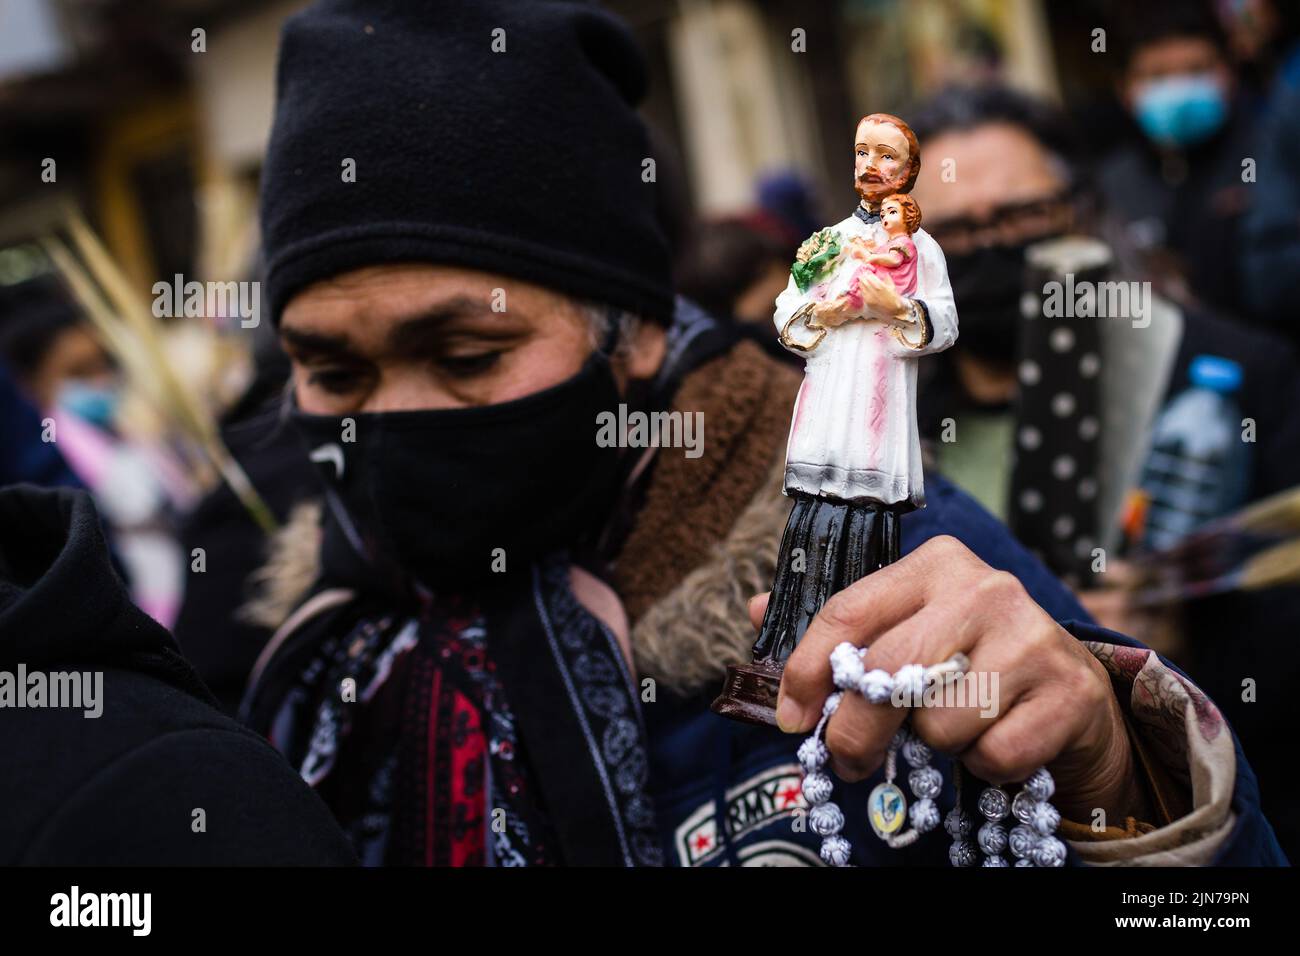 Buenos Aires, Argentina. 07th Aug, 2022. A woman holds in her hand an image of Saint Cayetano during the traditional Mass celebrated every August 7. After two years of pandemic, the great feast of San Cayetano was celebrated again in the church Santuario San Cayetano, in the cosmopolitan neighborhood Liniers of the city of Buenos Aires. As every August 7, many faithful could touch the image and venerate the Saint of Labor to ask for bread, peace and sustenance. Credit: SOPA Images Limited/Alamy Live News Stock Photo